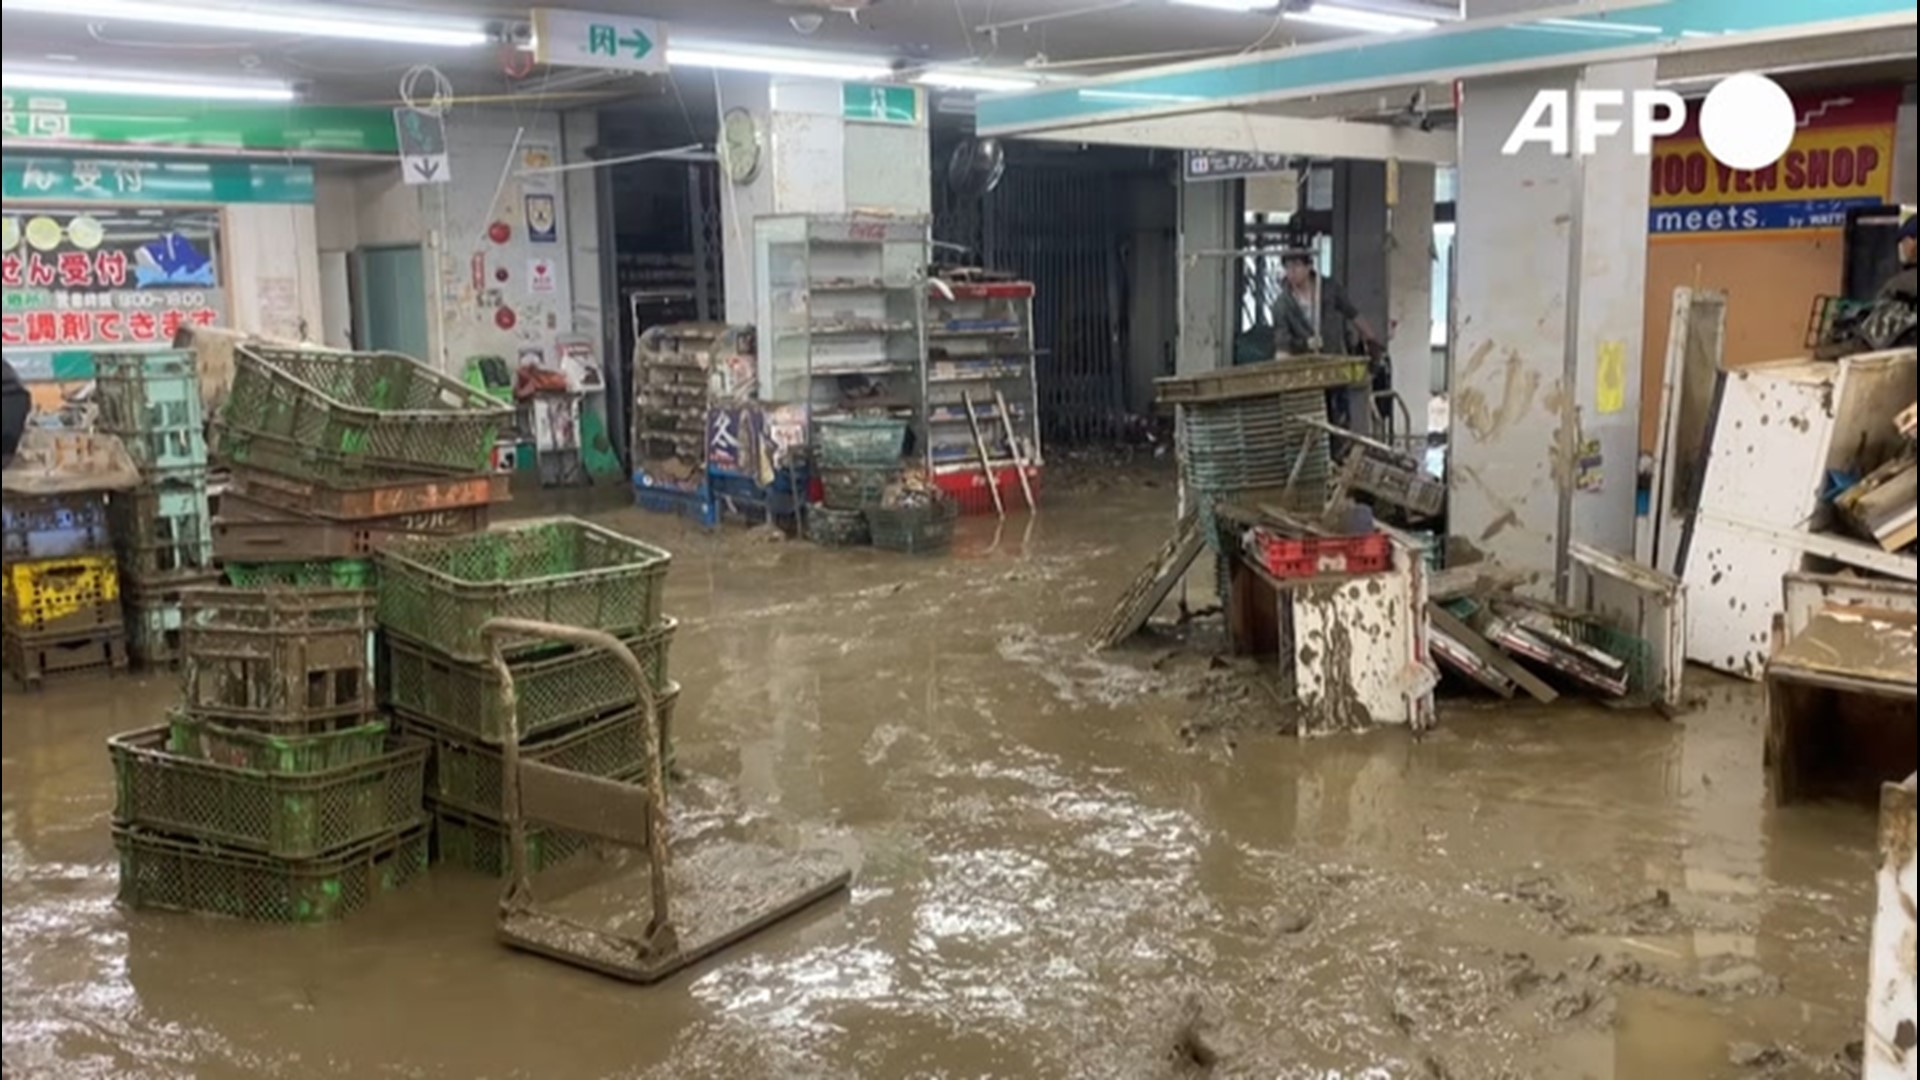 Workers cleaned up a supermarket in Hitoyoshi, Japan, on July 9, after deadly flooding swept through the city, leaving mud throughout the building.